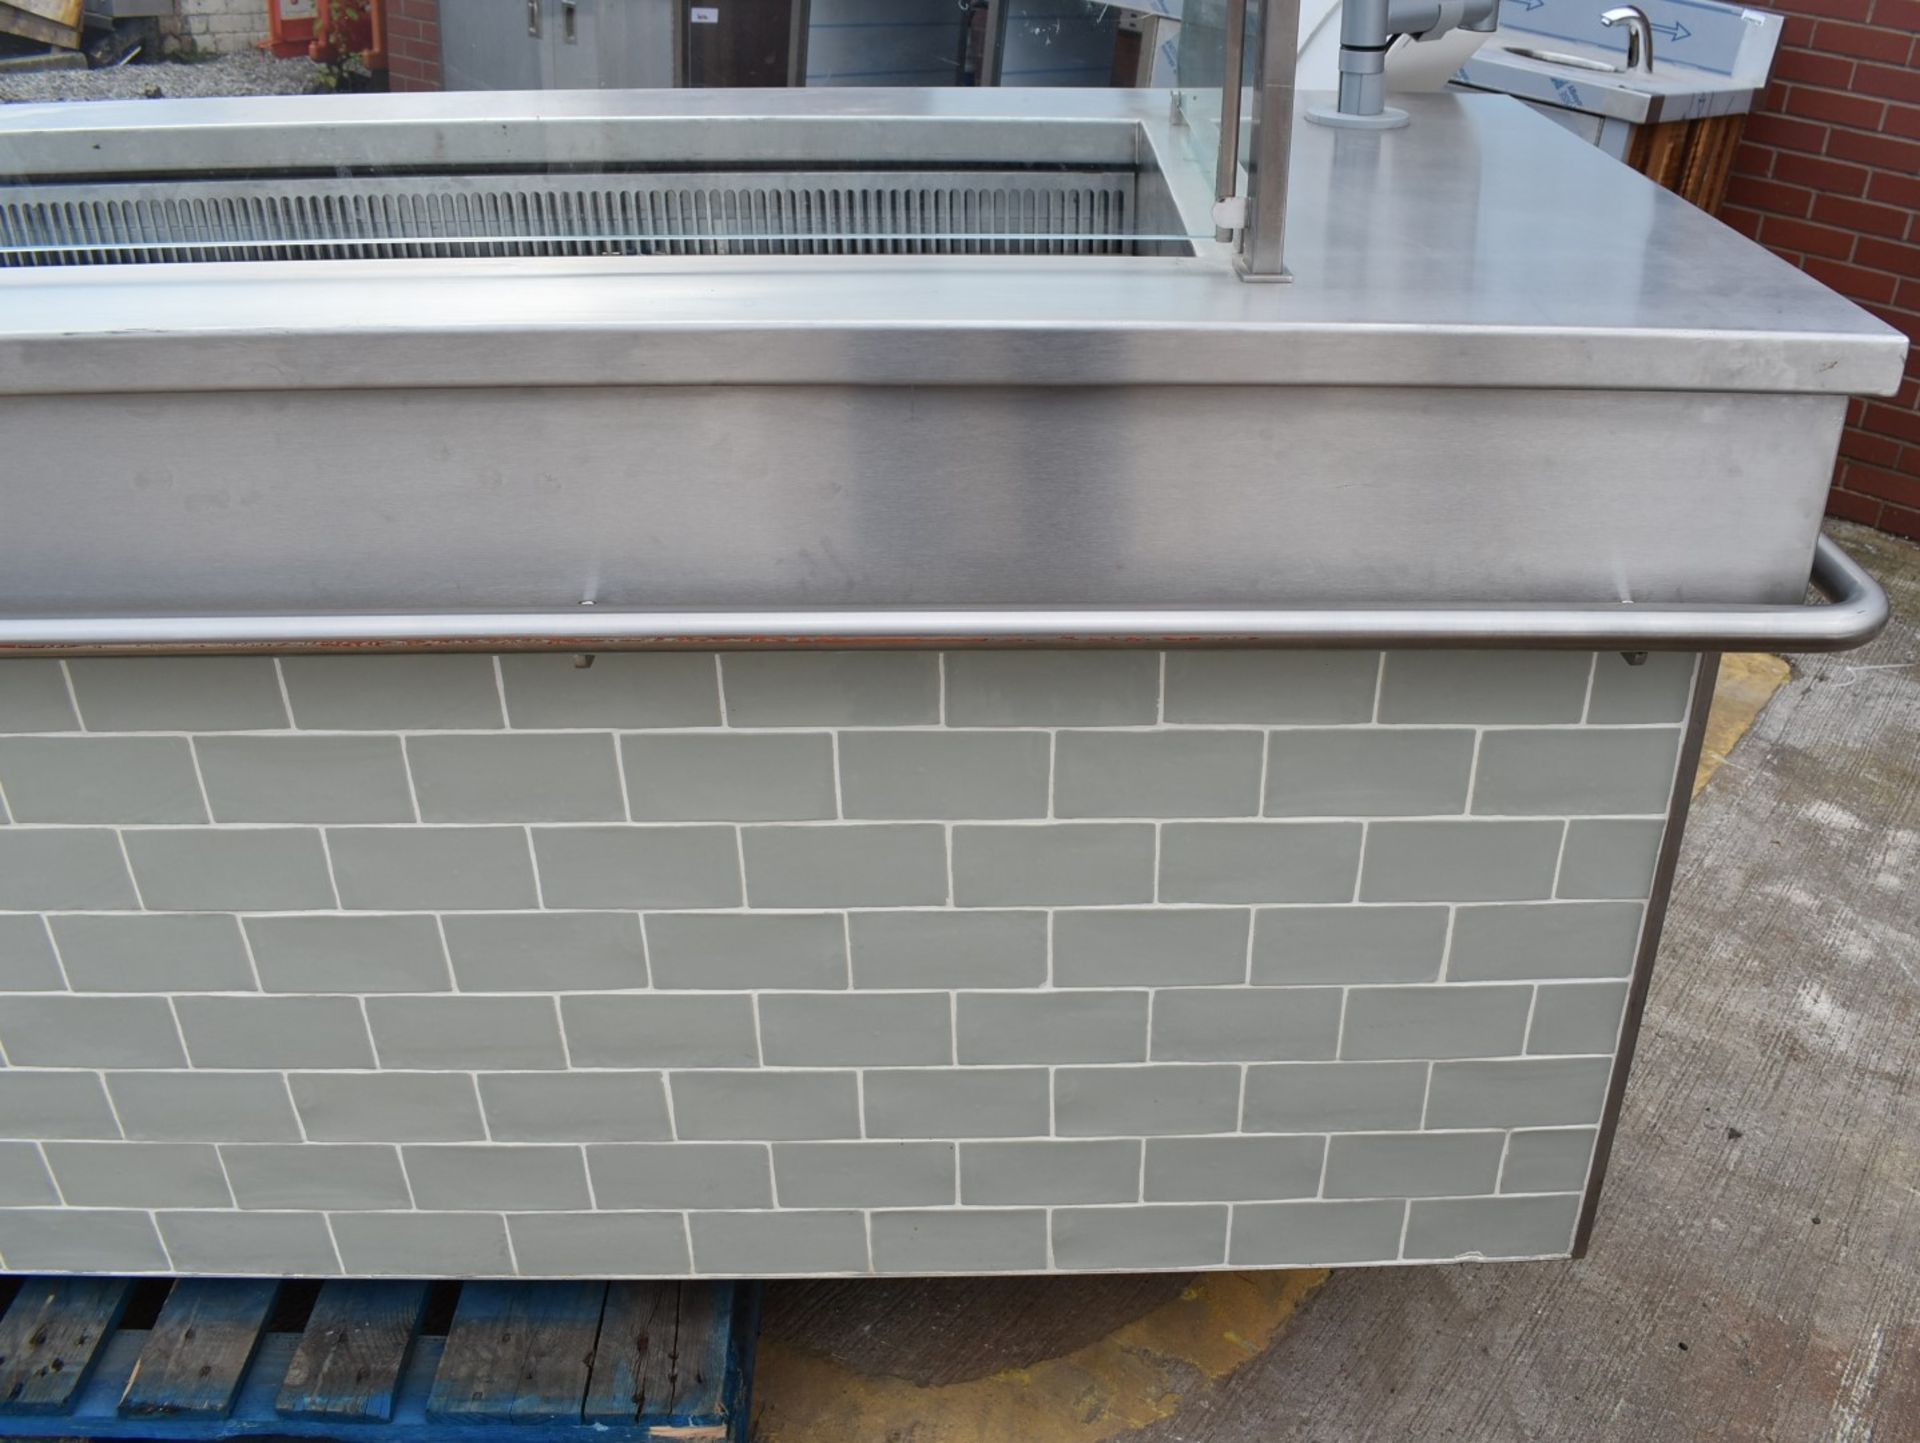 1 x Commercial Food Display Counter Featuring a Fan Blown Well, Glass Viewing Screen, Tiles Front - Image 29 of 60